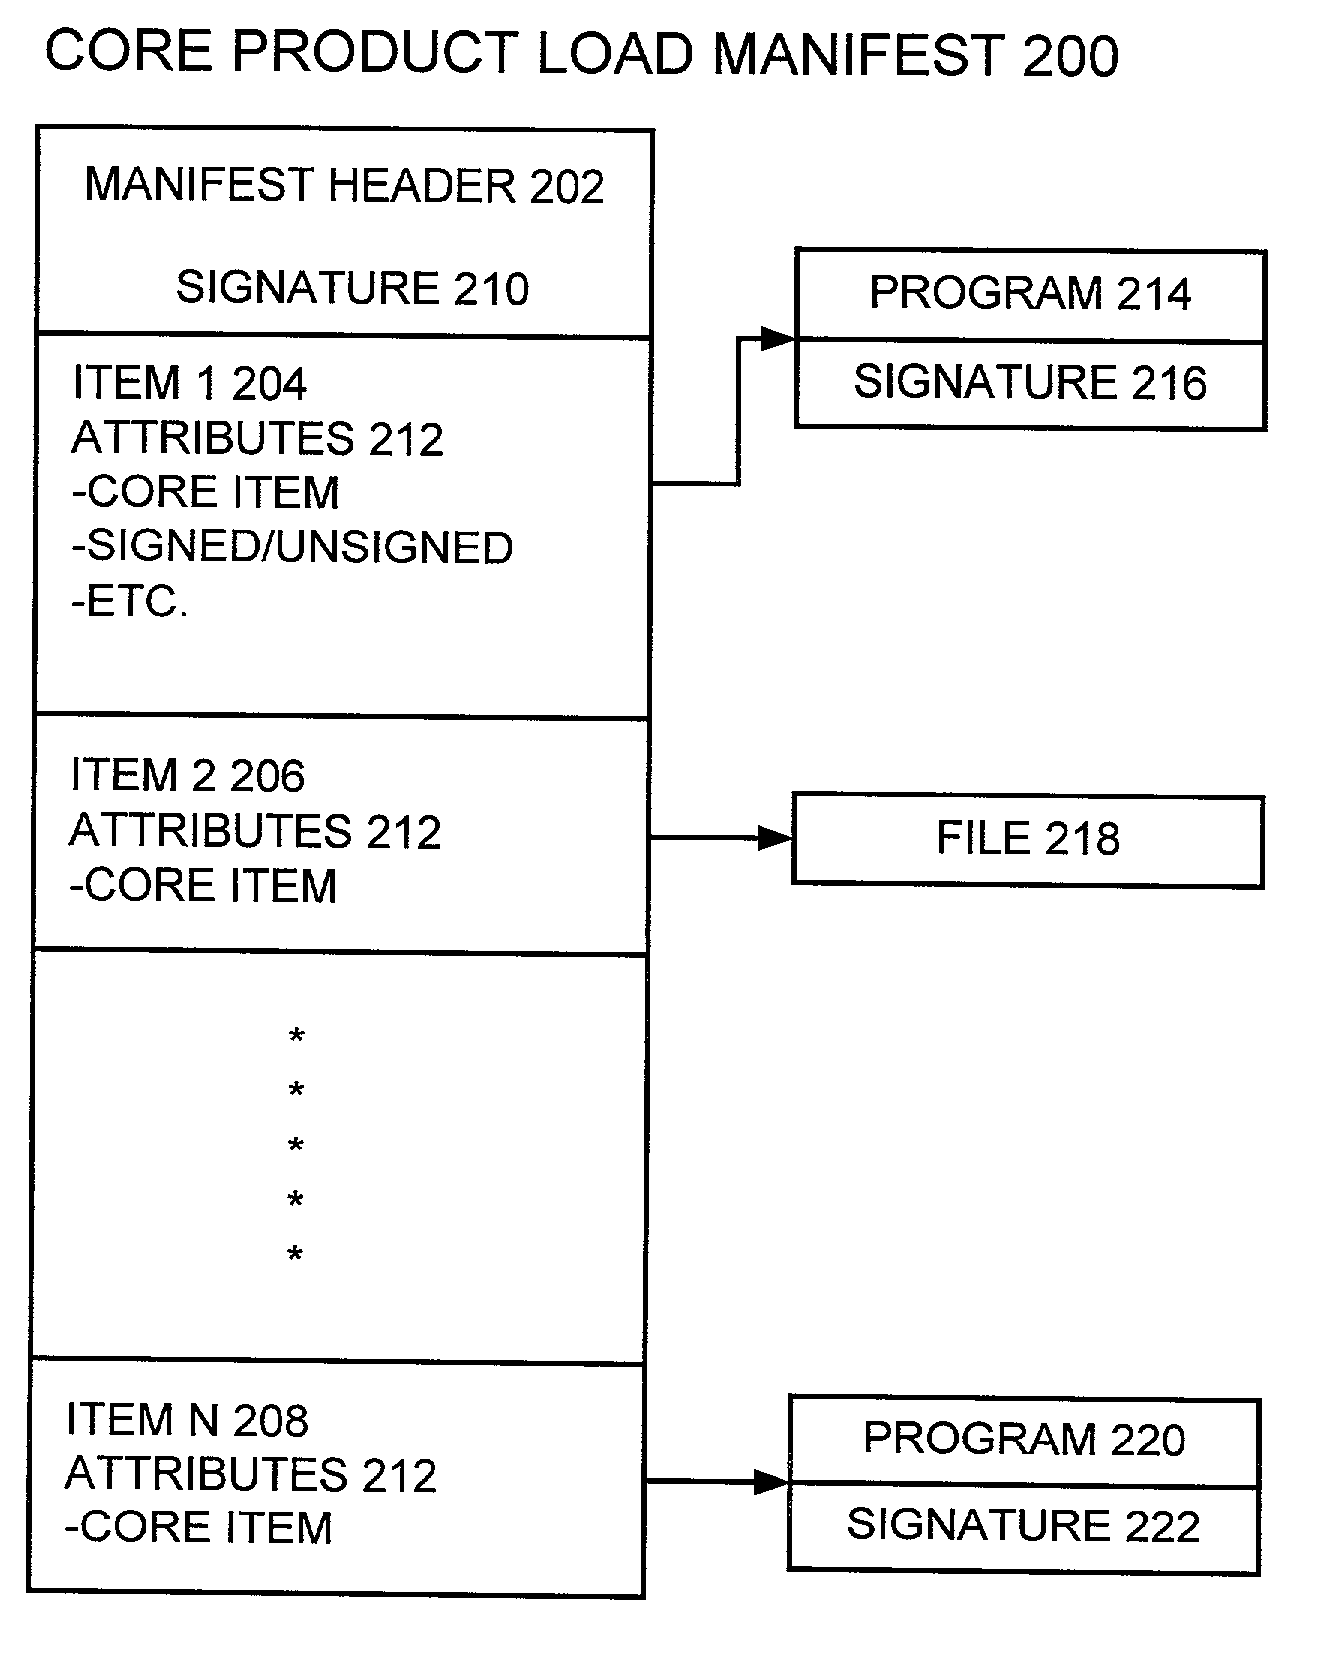 Method and apparatus for protecting ongoing system integrity of a software product using digital signatures